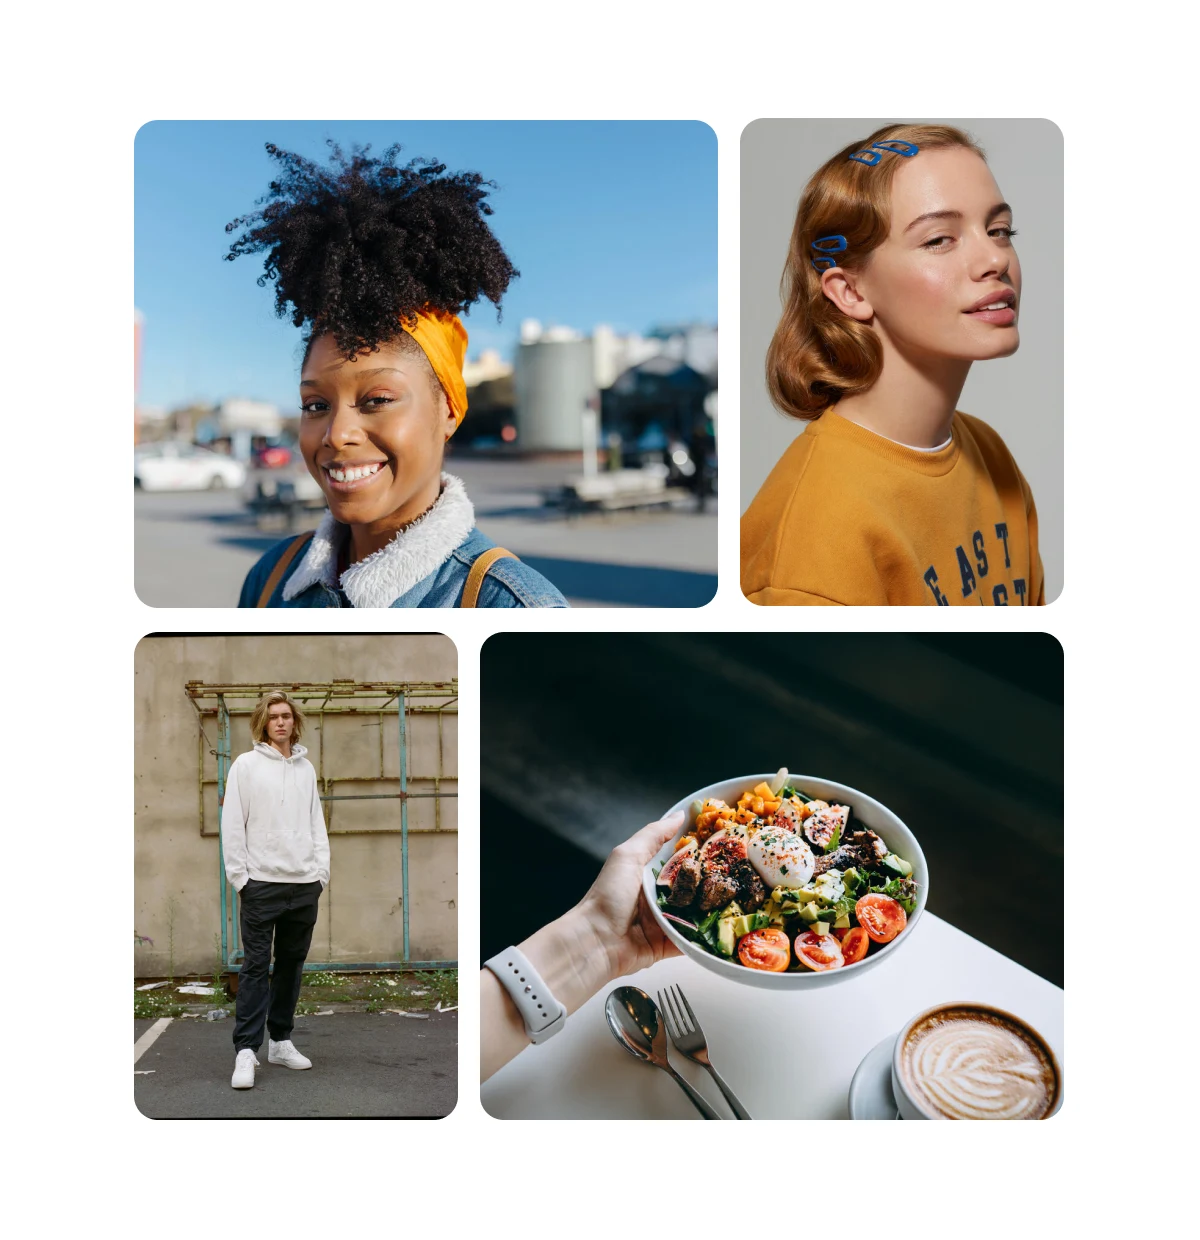  Pin grid featuring Black woman with bright yellow hair scarf with hair pulled up in a puff, white woman with yellow sweatshirt, white man with a white hoodie and black trousers, a salad in a white bowl on a table..